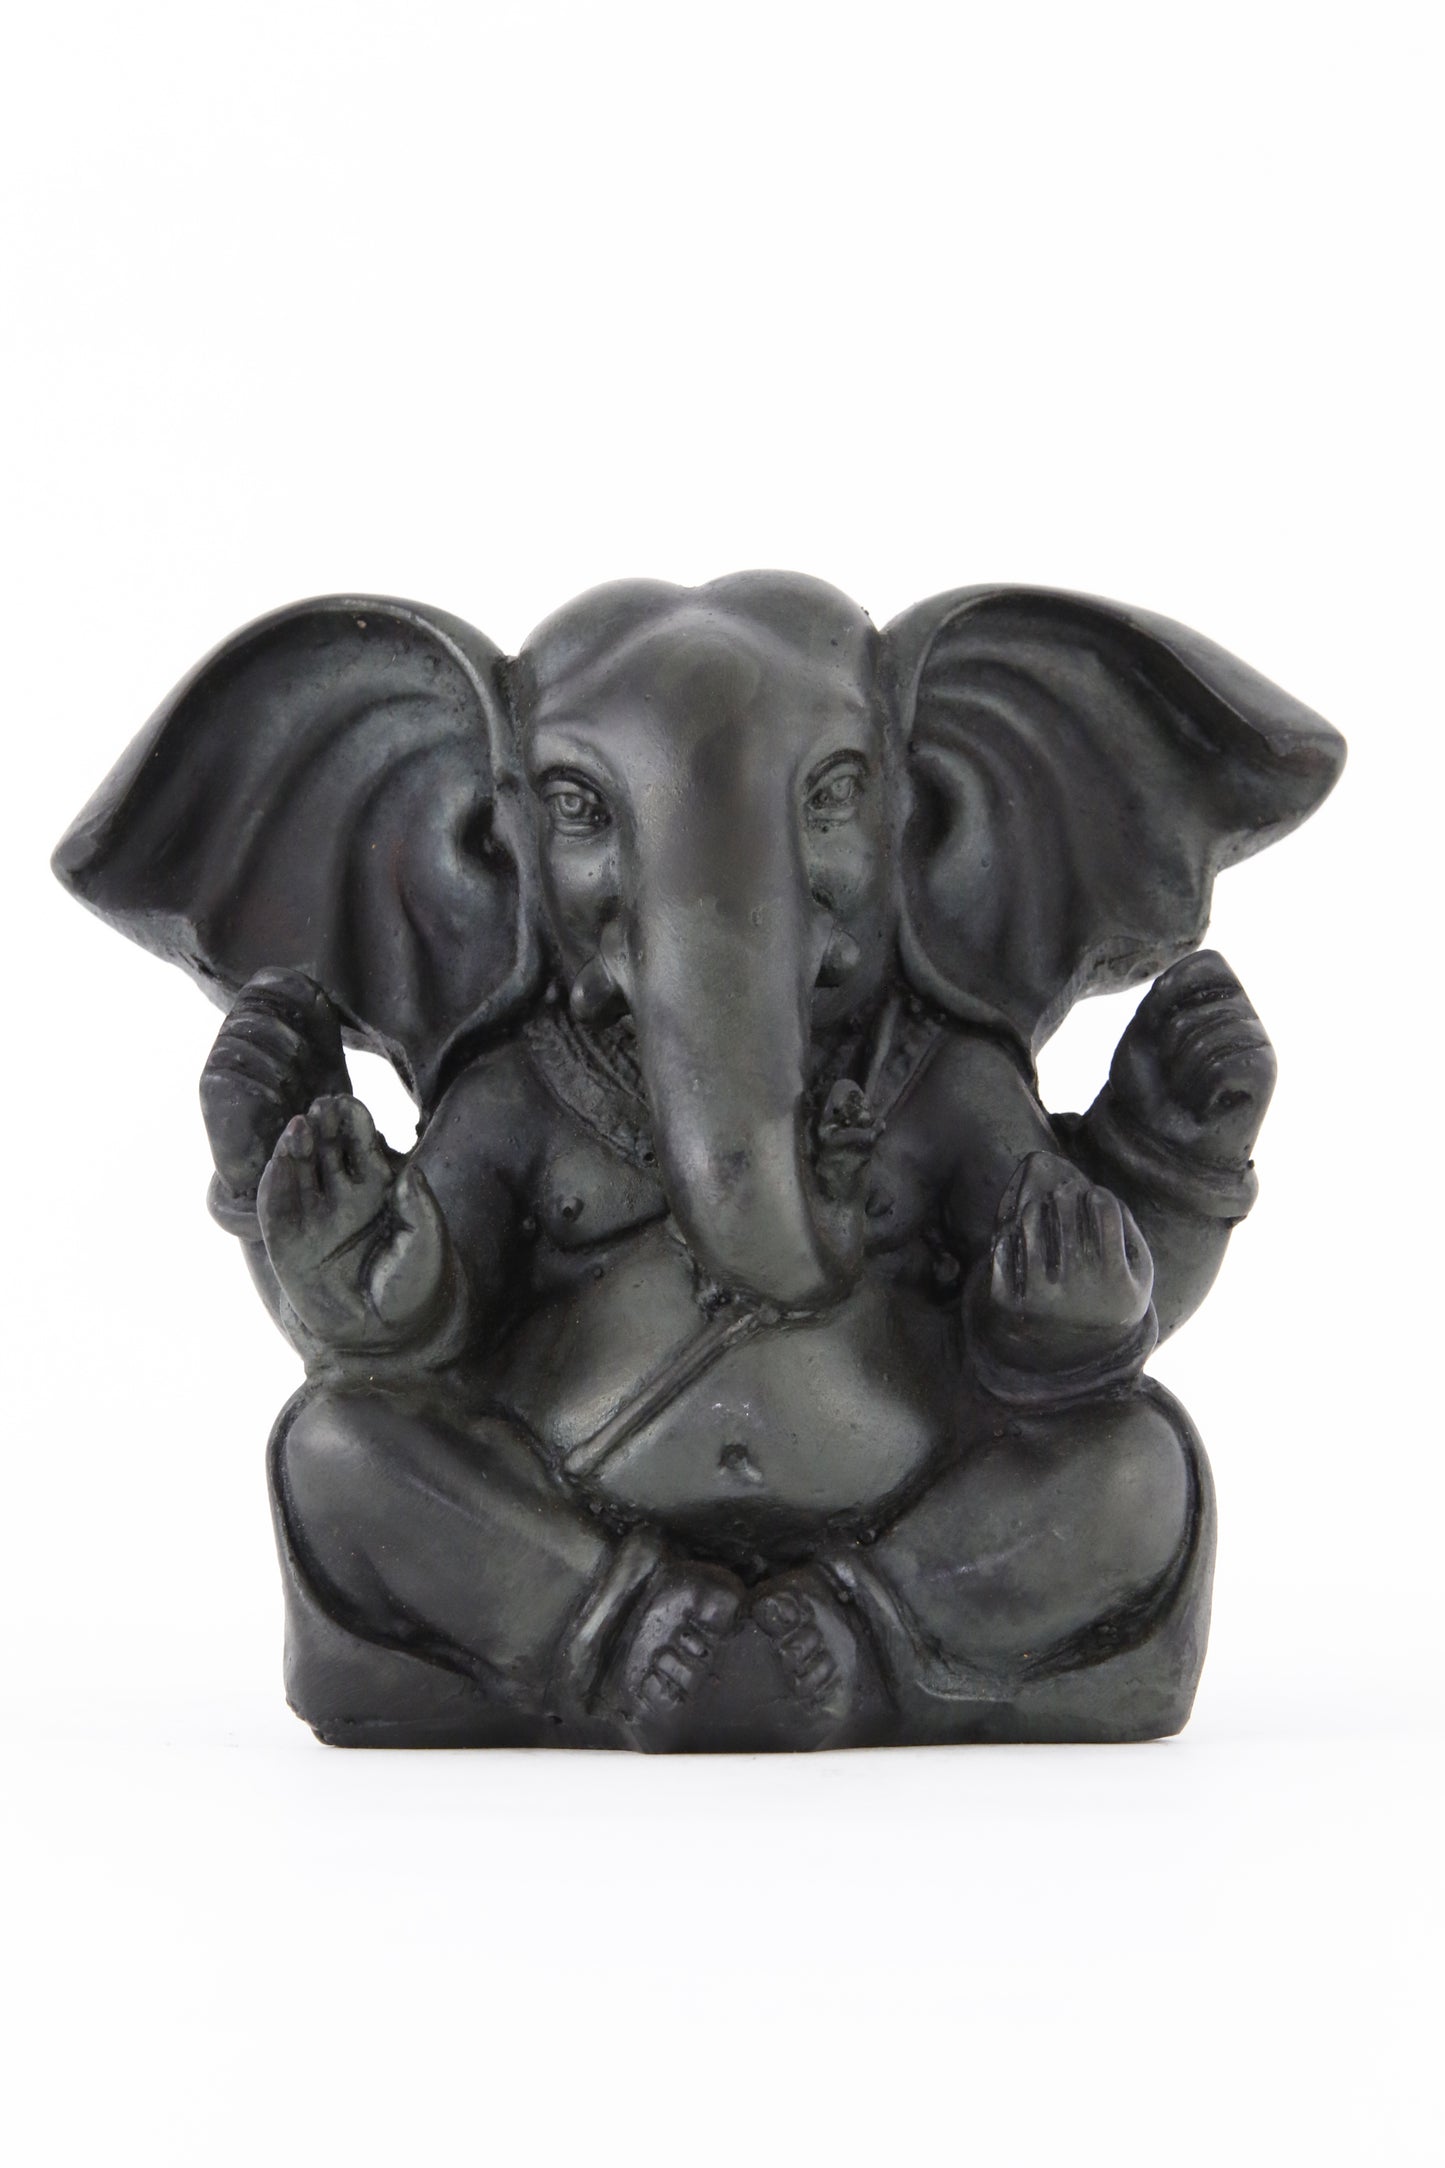 GANESHA BALD POINTY EARS STATUE DARK LARGE FRONT VIEW 